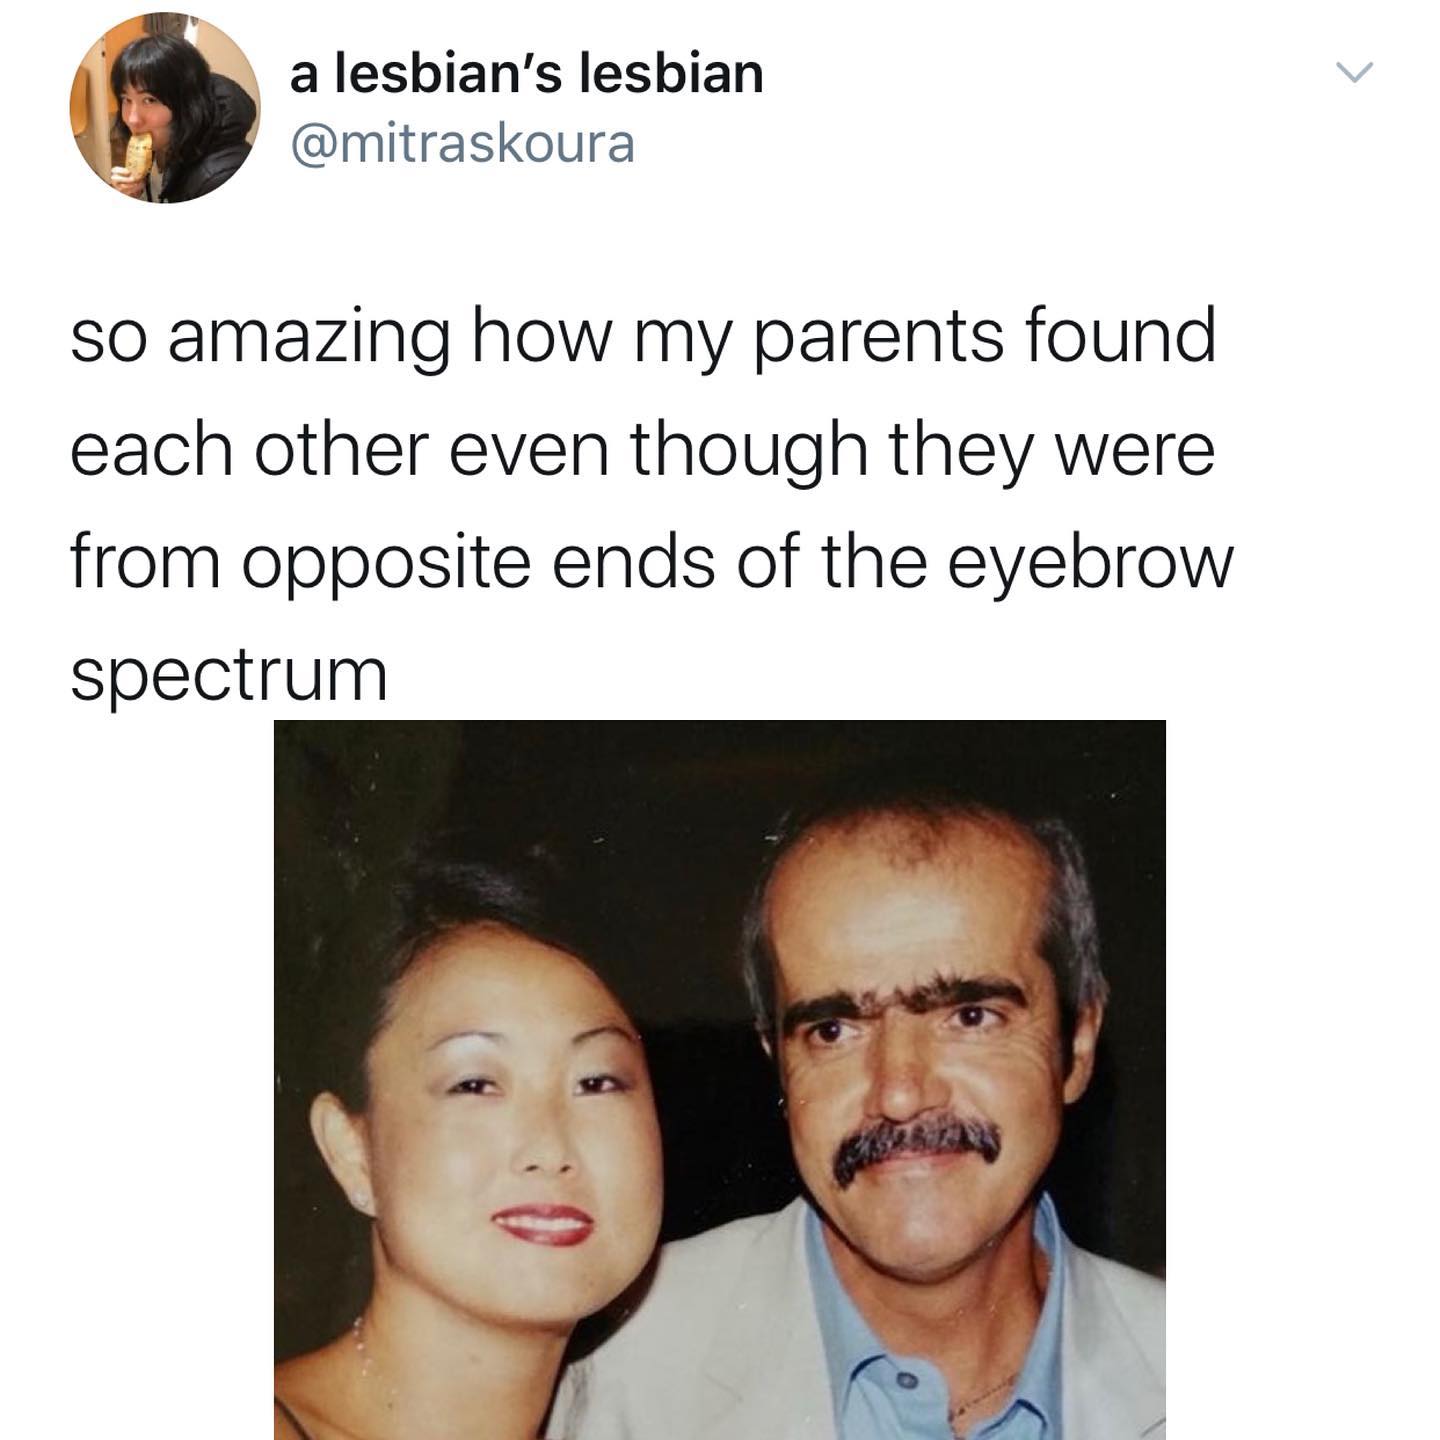 dank memes - twitter - human behavior - v a lesbian's lesbian so amazing how my parents found each other even though they were from opposite ends of the eyebrow spectrum bajas